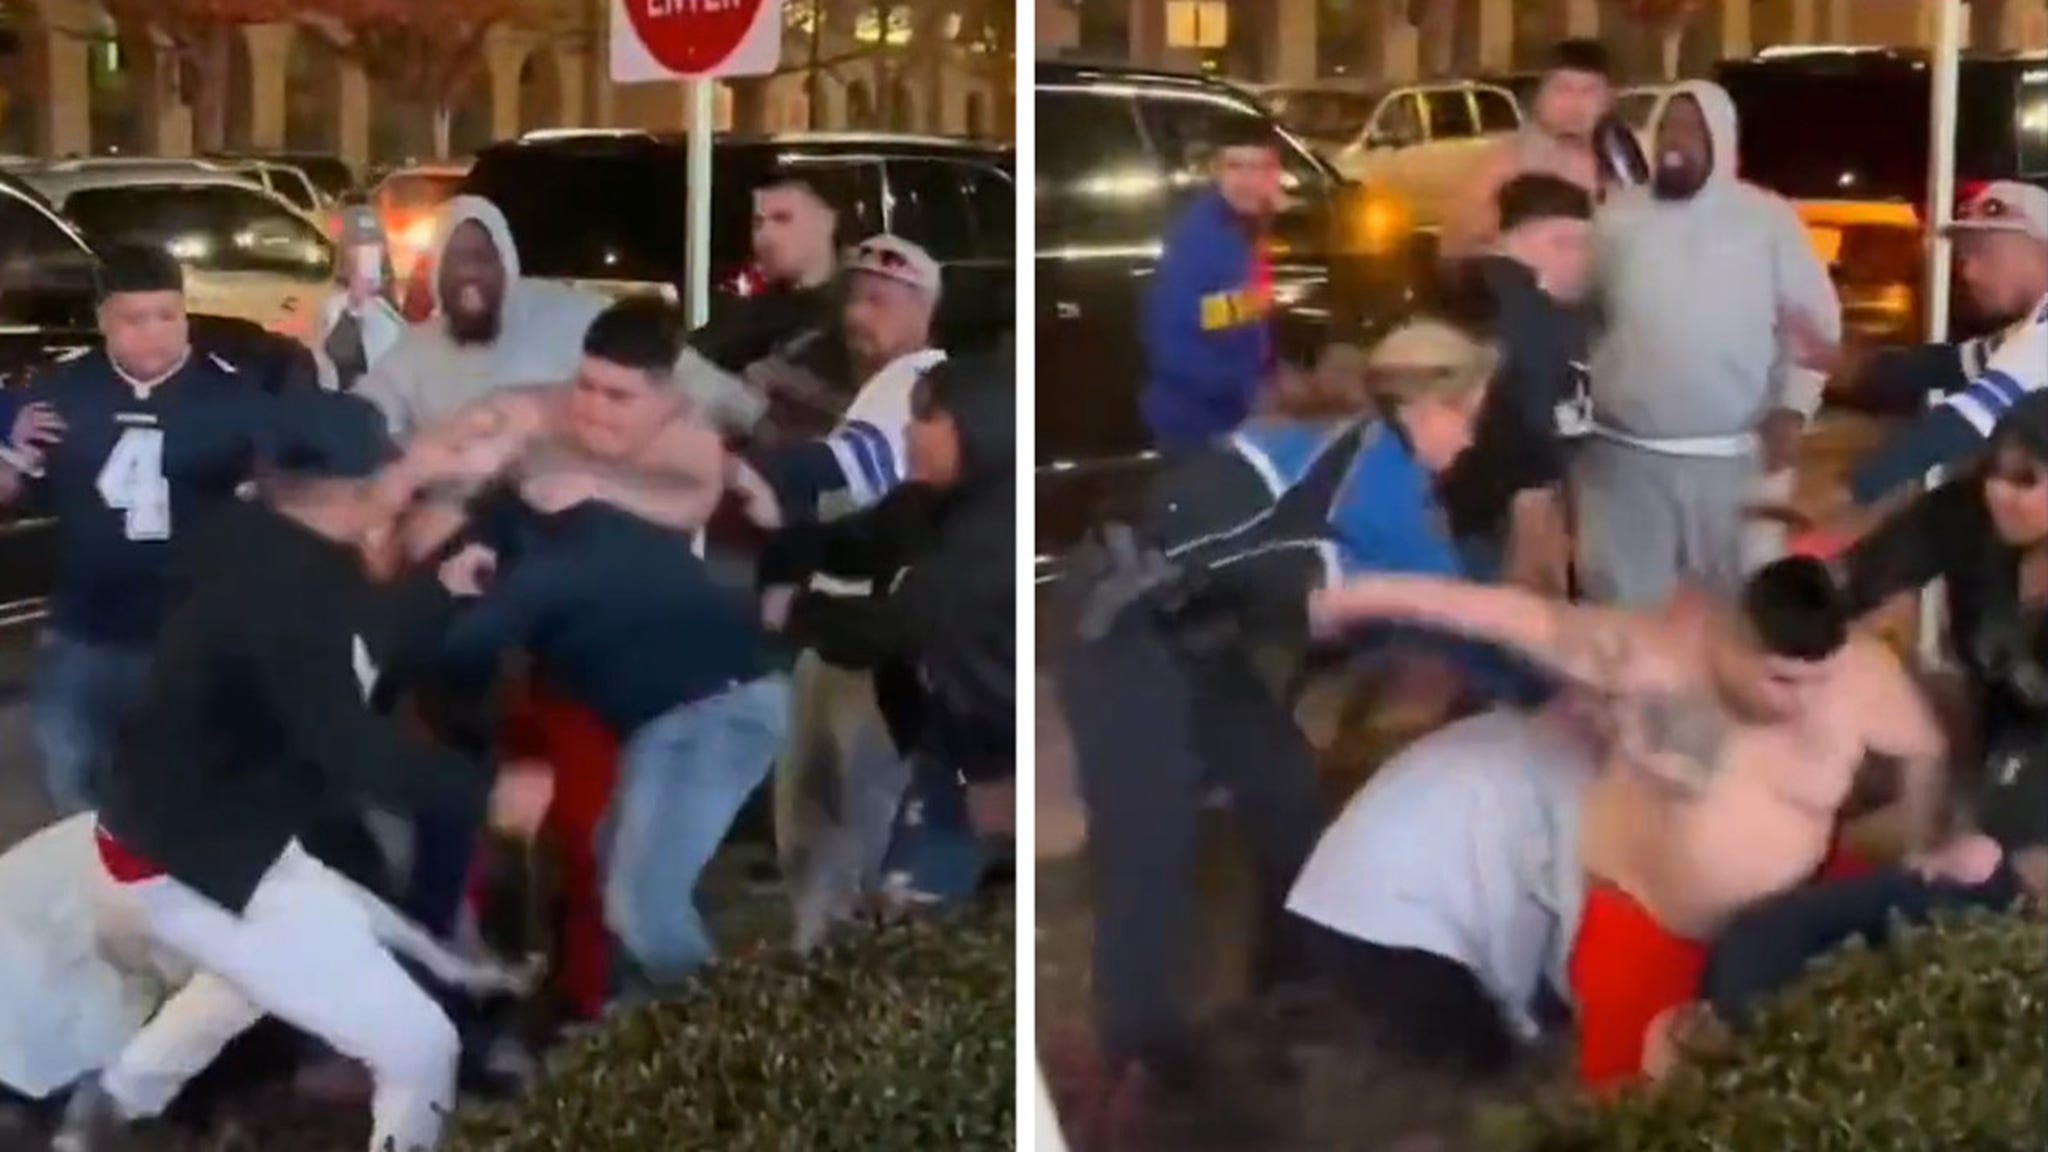 49ers fans get into brawl at preseason game in front of several children